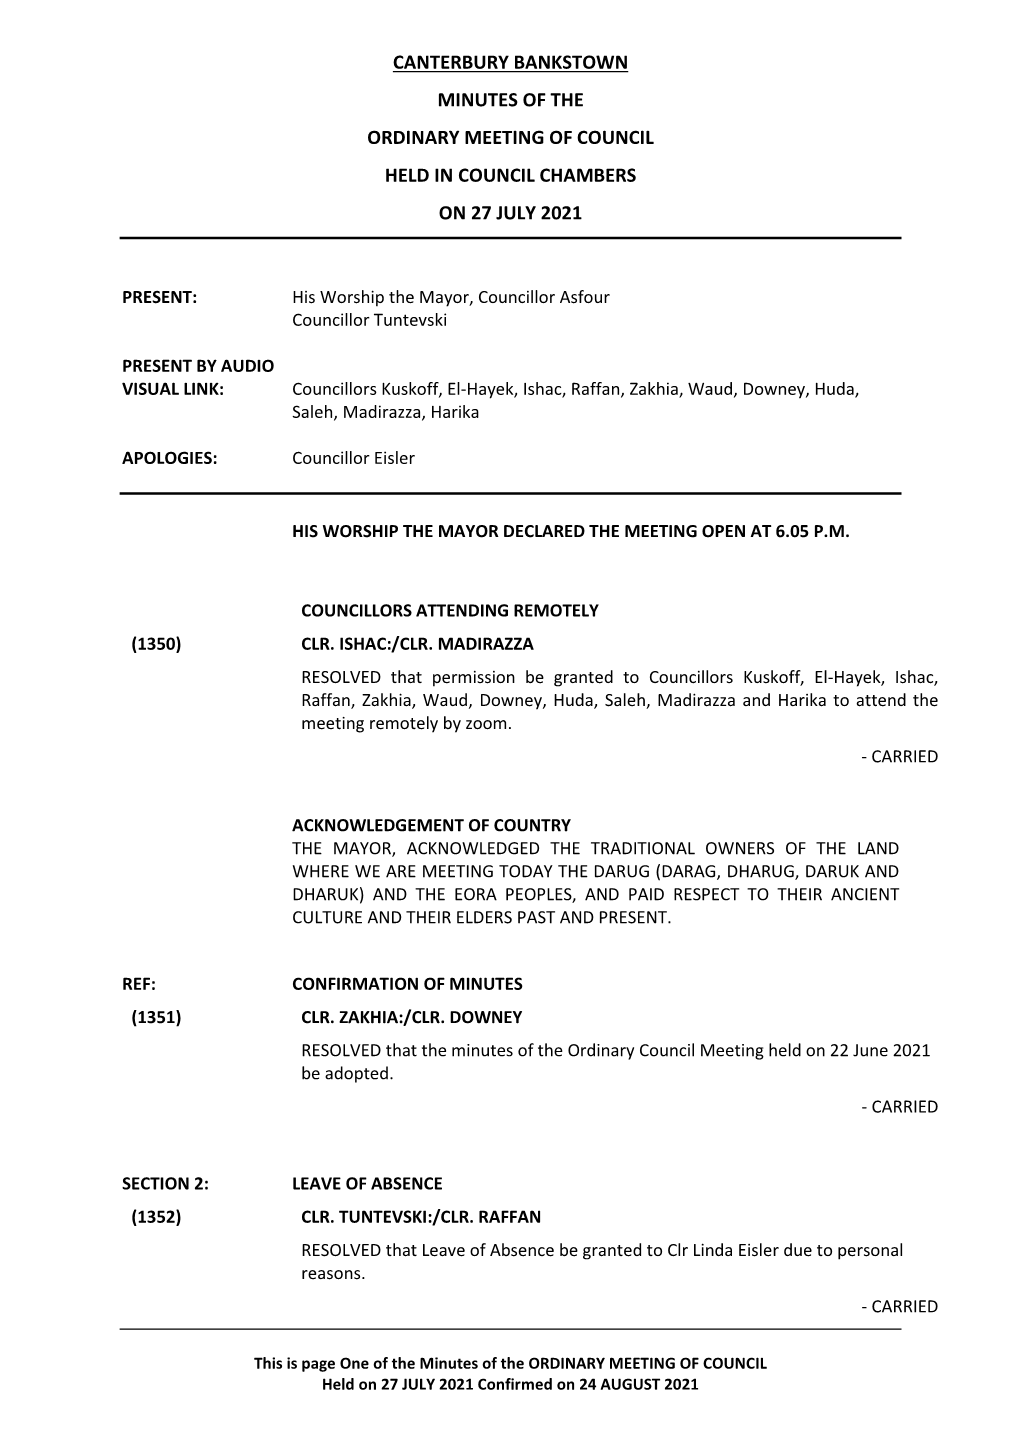 Minutes of Ordinary Meeting of Council